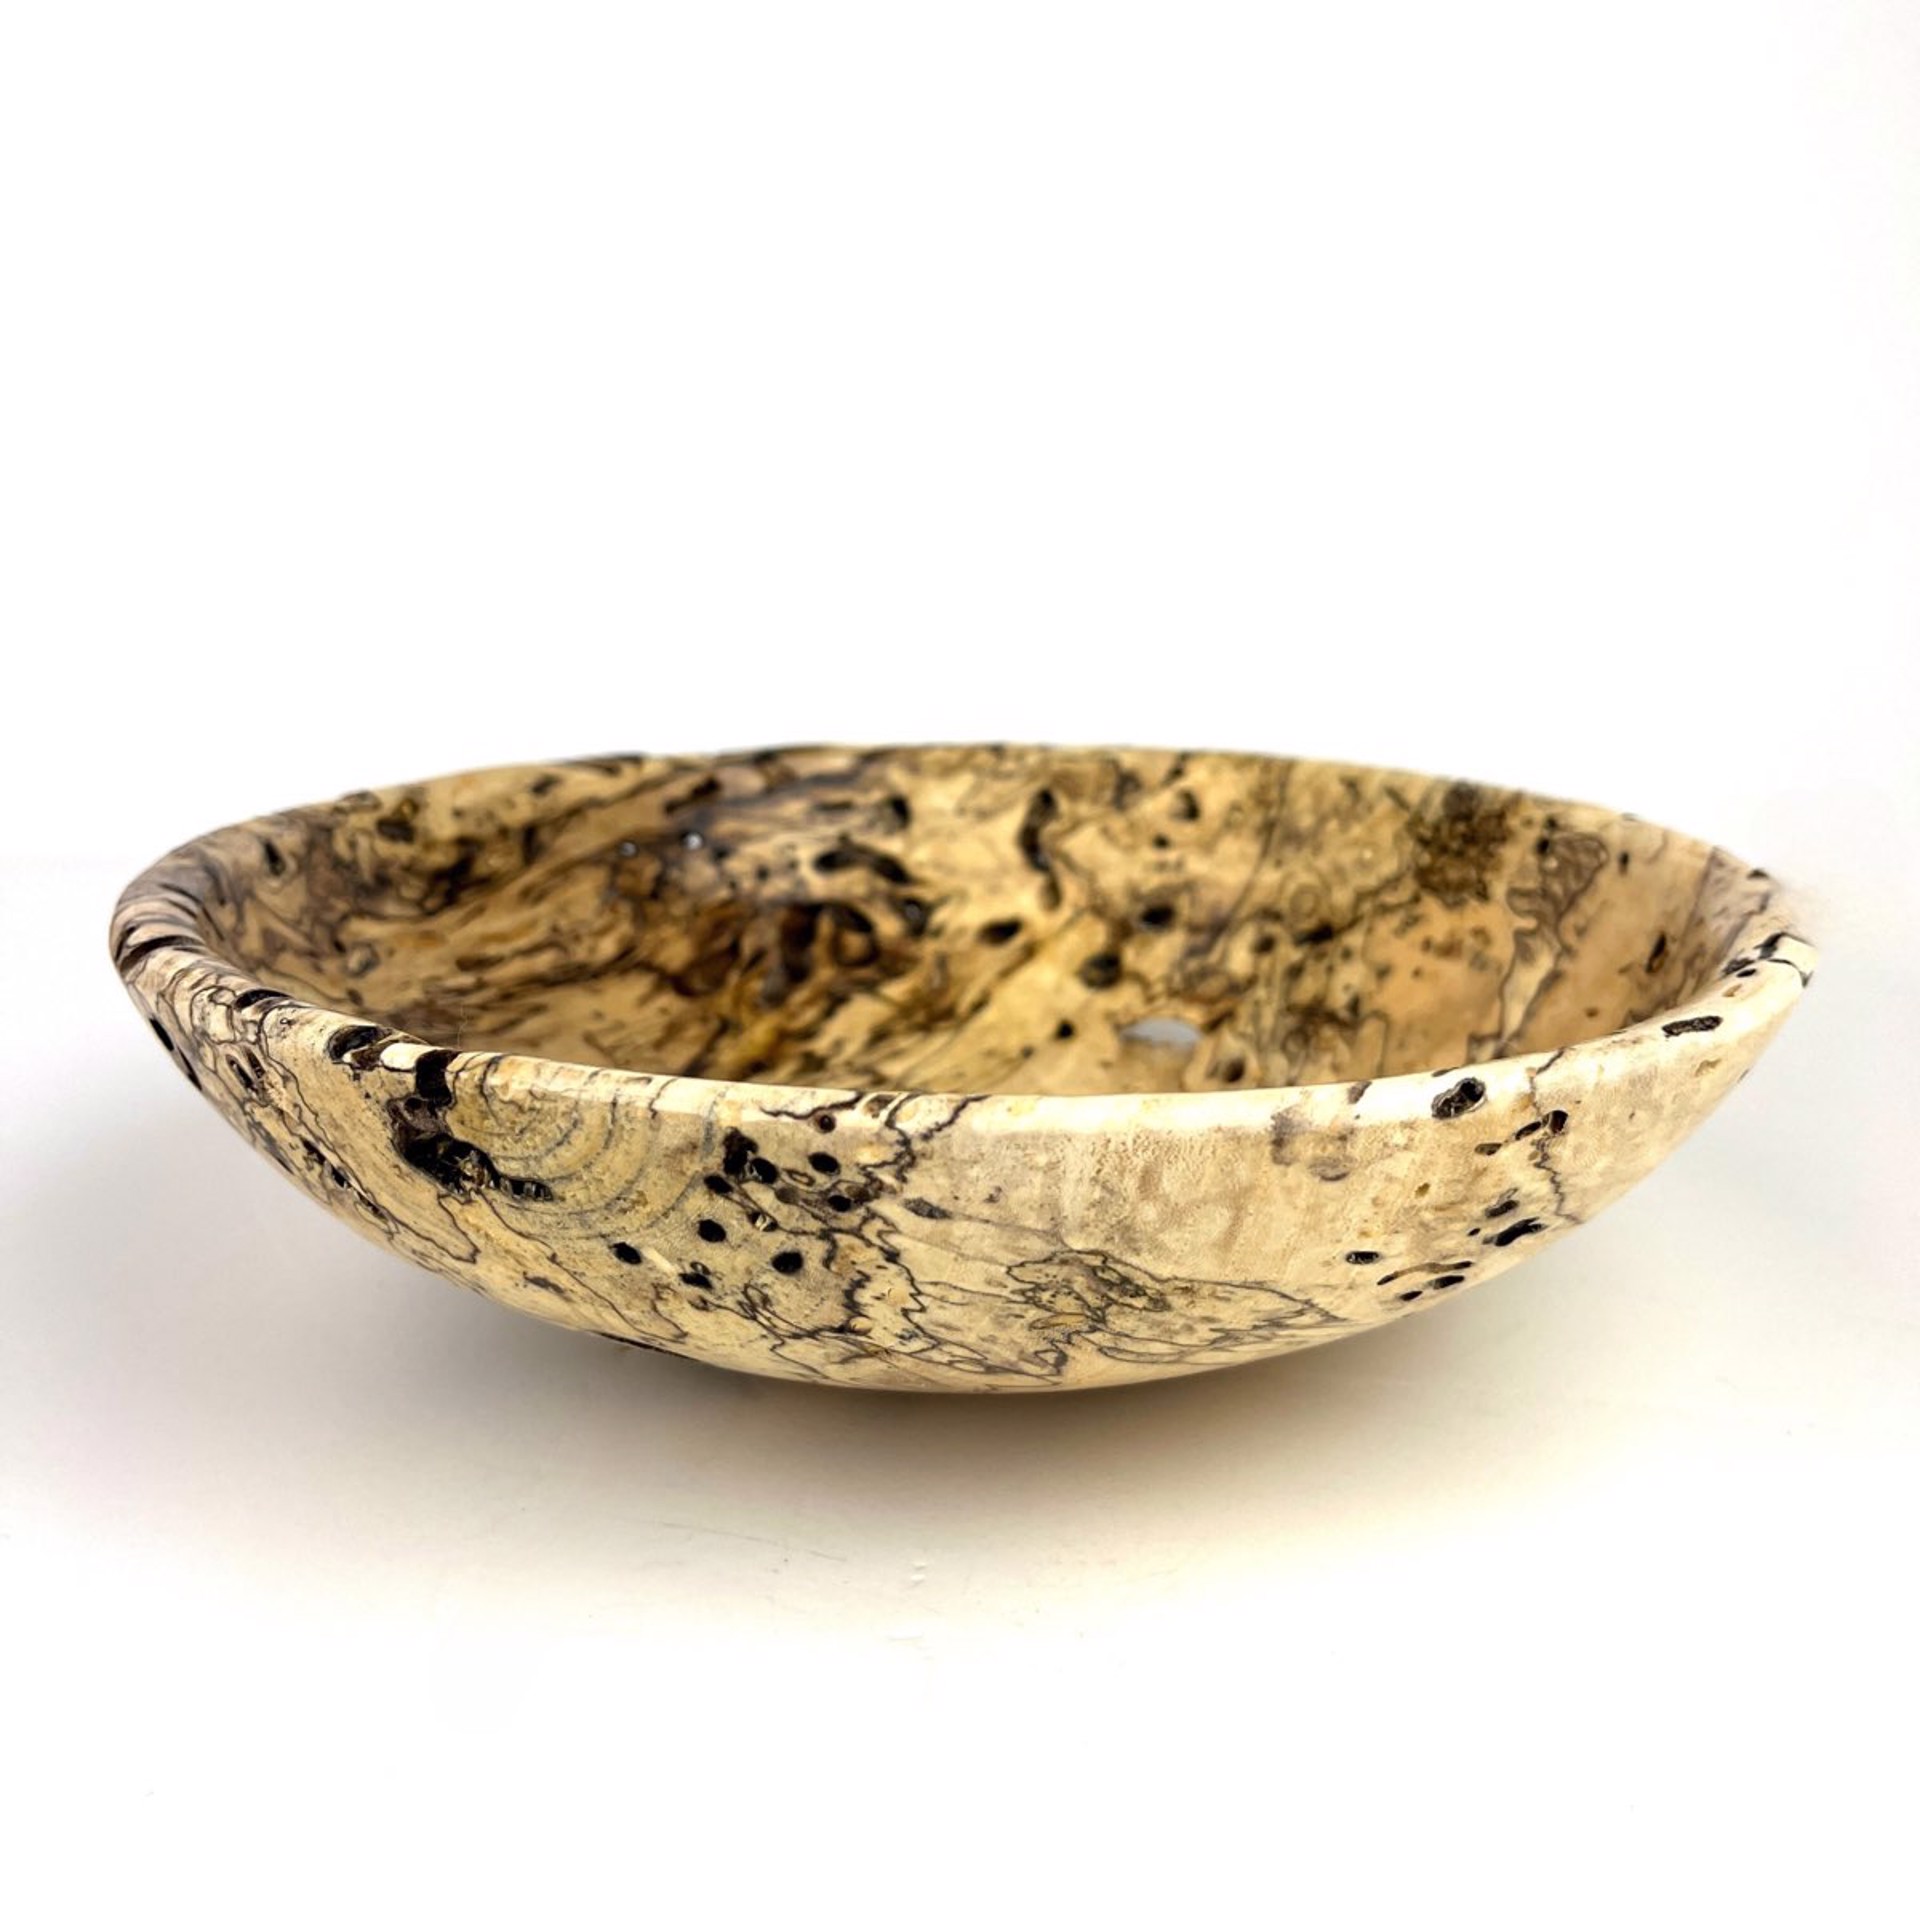 Elm Bowl by Don Moore